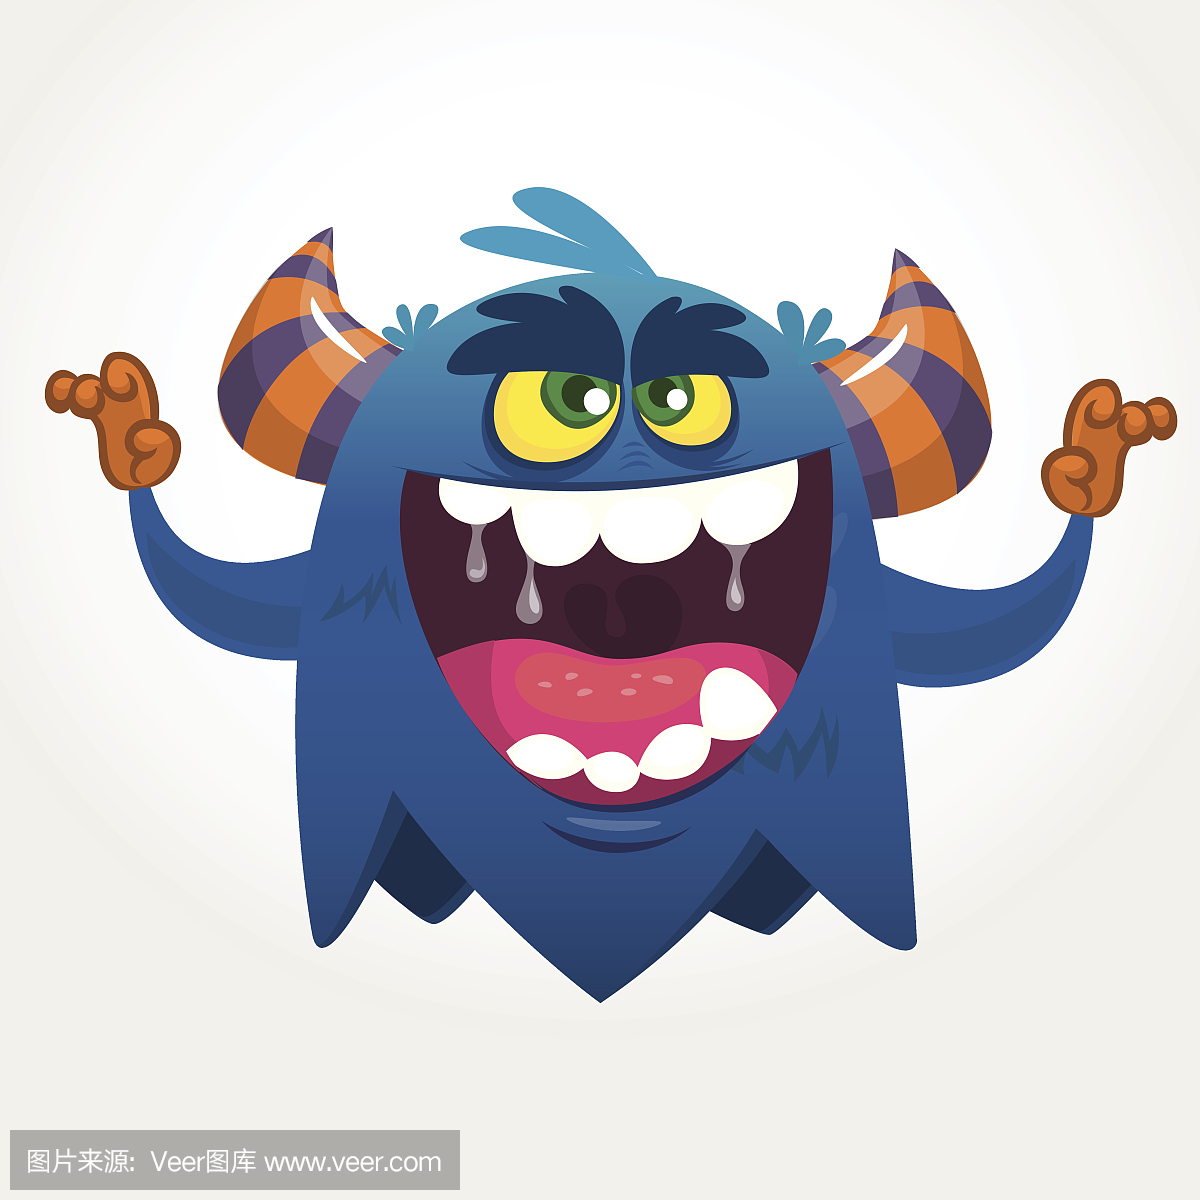 . Yelling angry monster expression. Halloween v